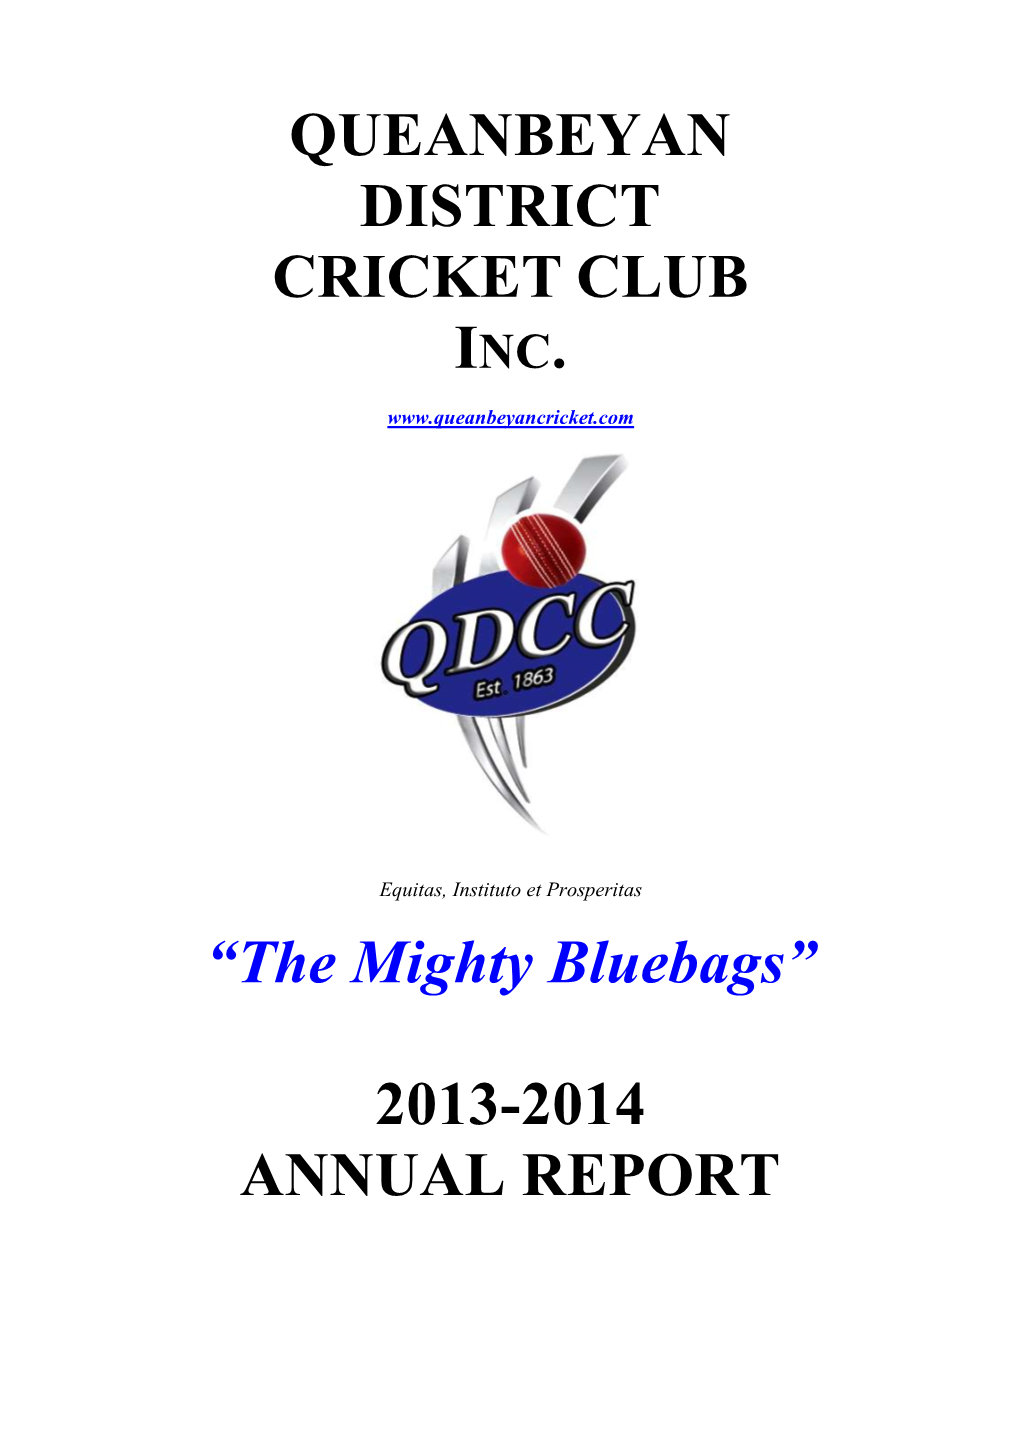 QDCC Annual Report 2013